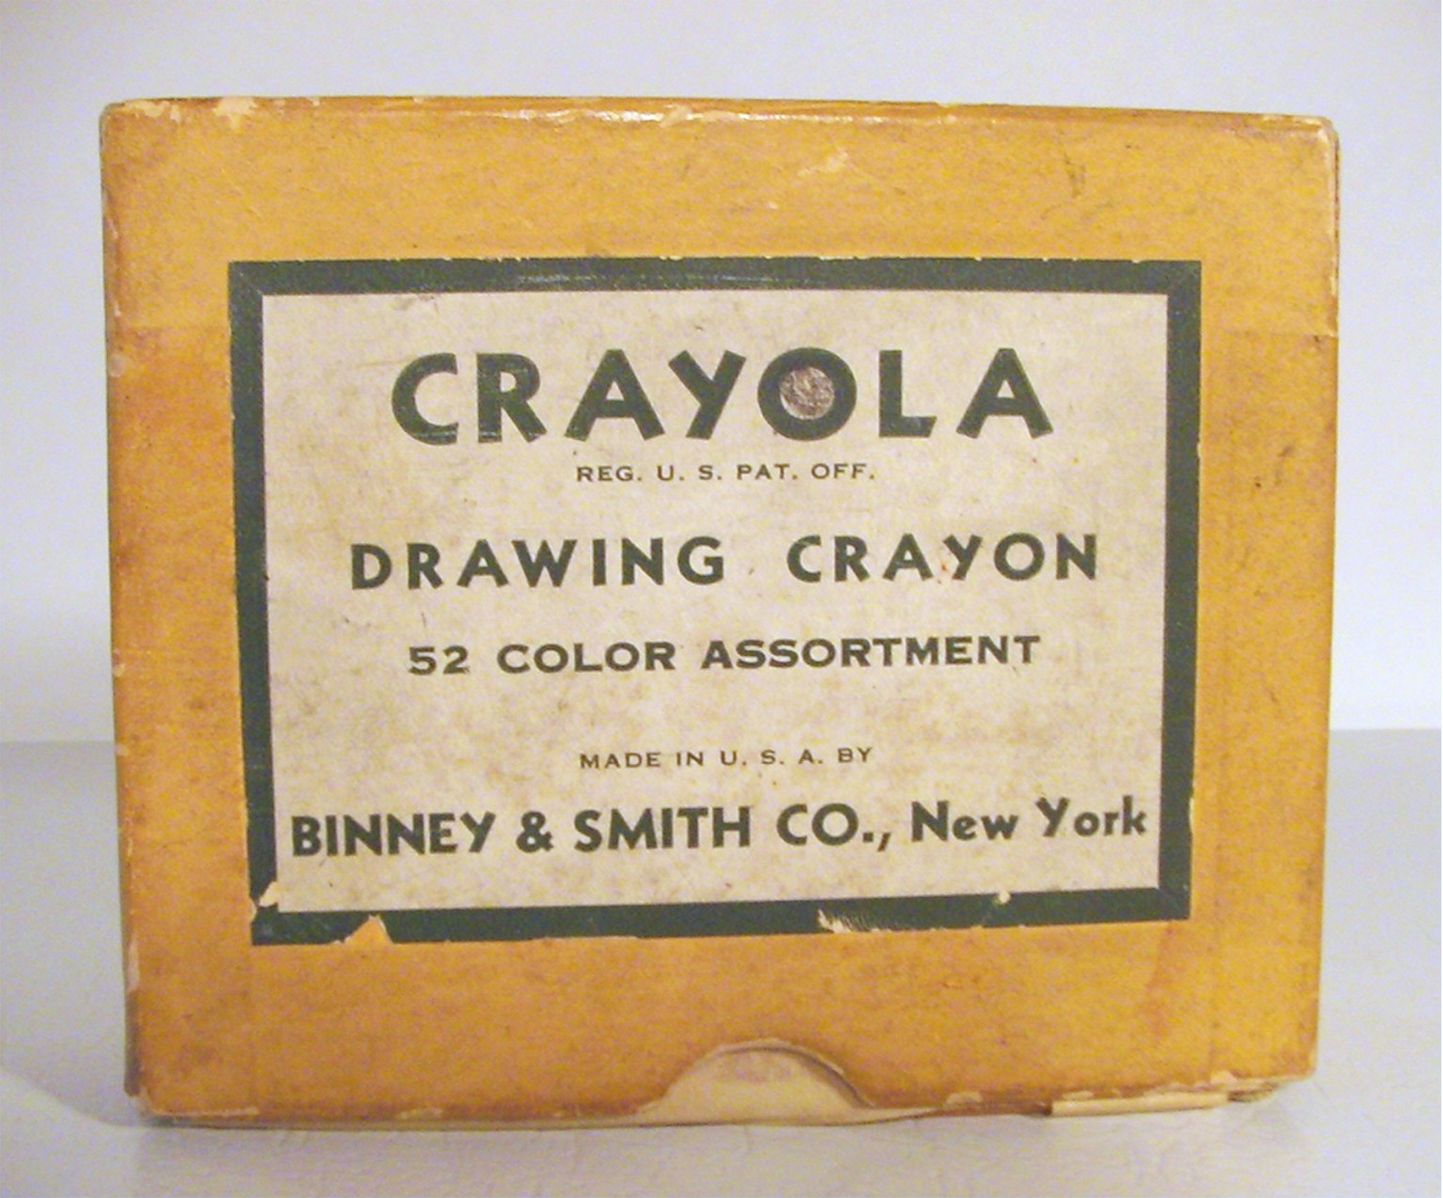 A box of Crayola crayons from around 1940 has the familiar yellow color, but a very basic label.